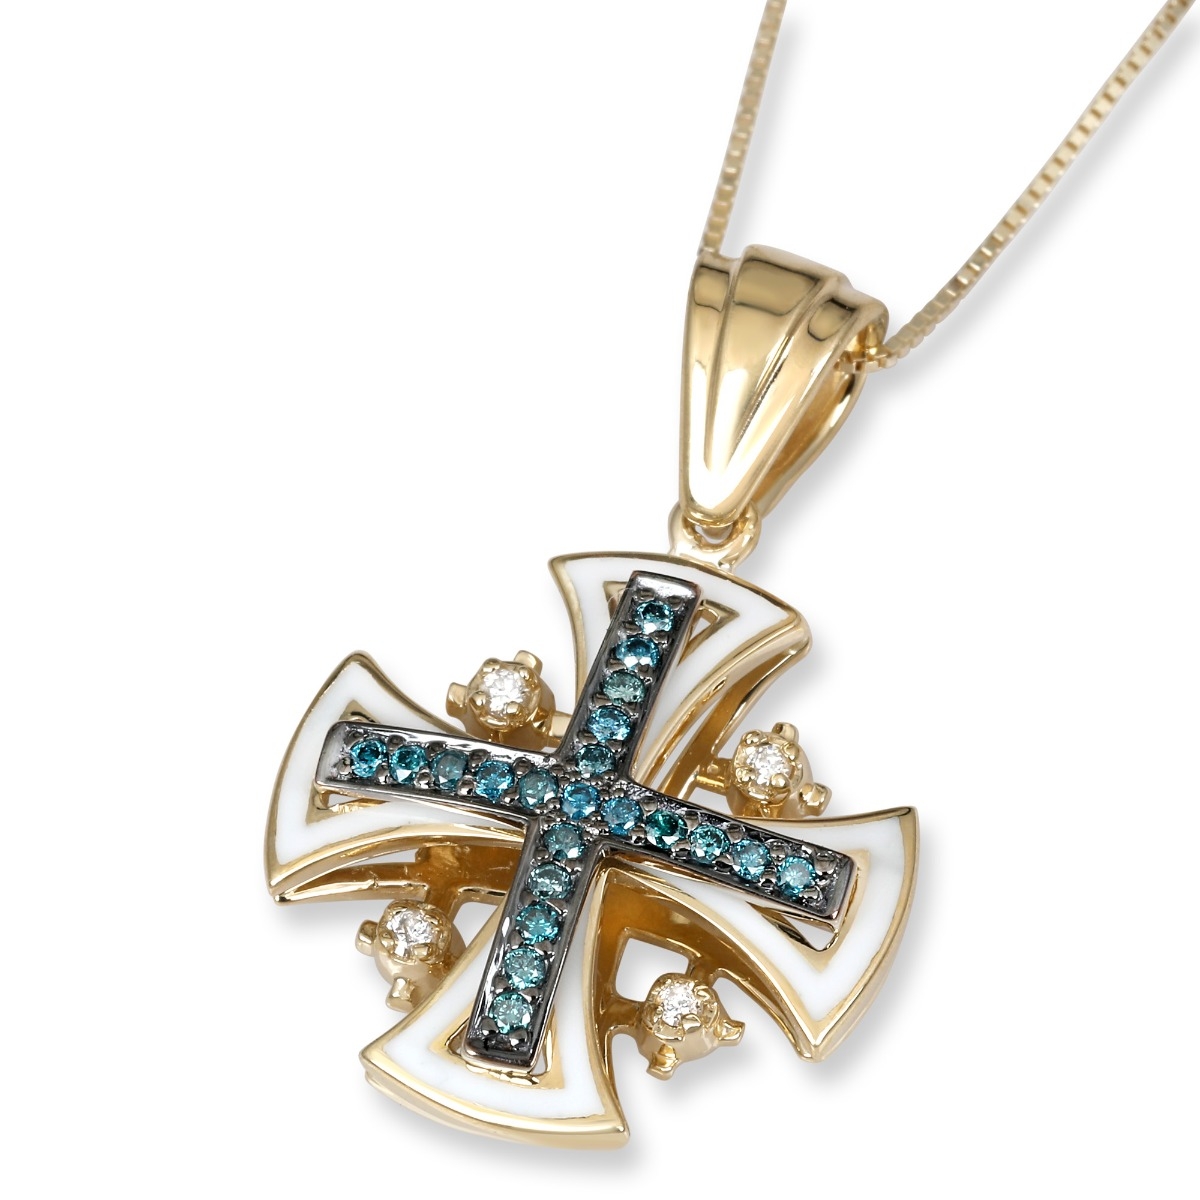 Anbinder Deluxe 14K Yellow Gold and White Enamel Splayed Jerusalem Cross Pendant with White and Blue Diamonds - 1